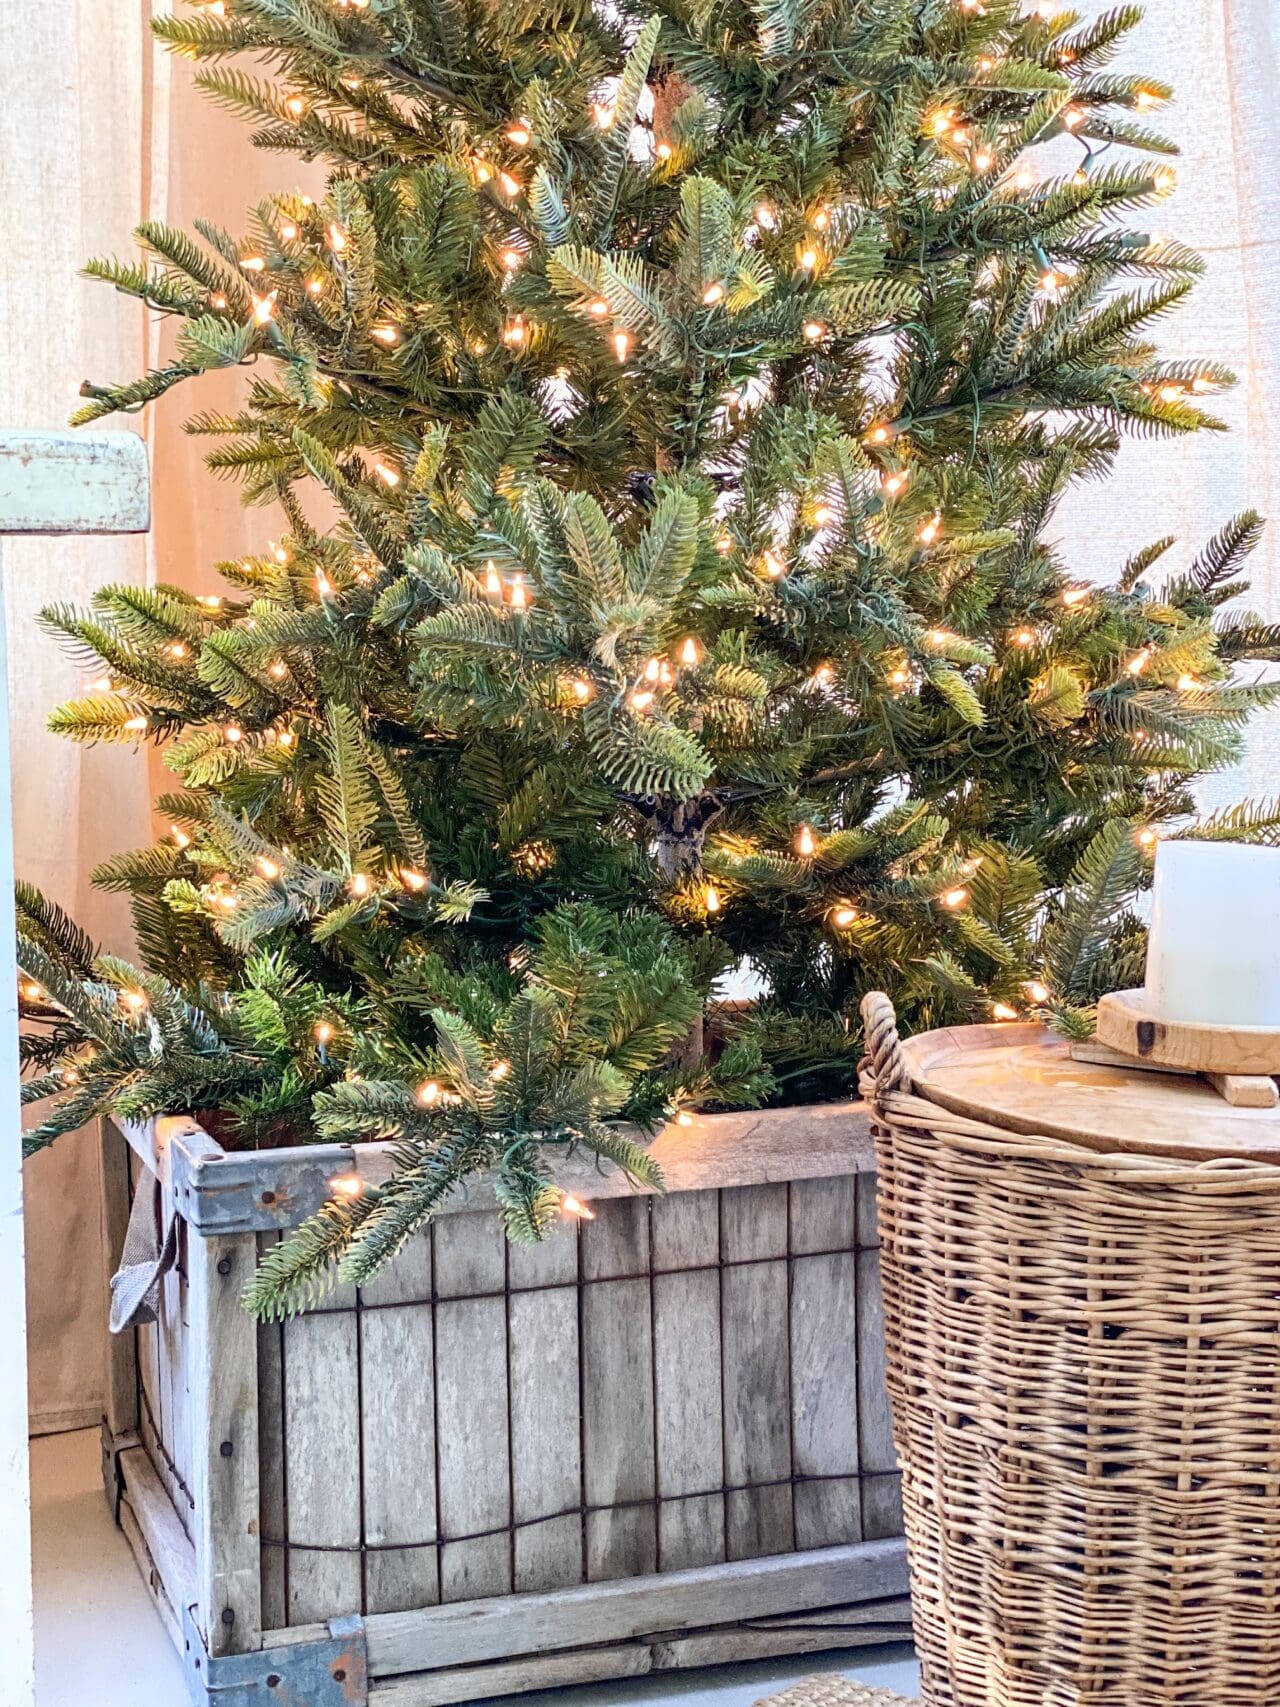 13 Best Ideas for Decorating a Sparse Christmas Tree - Robyn's French Nest